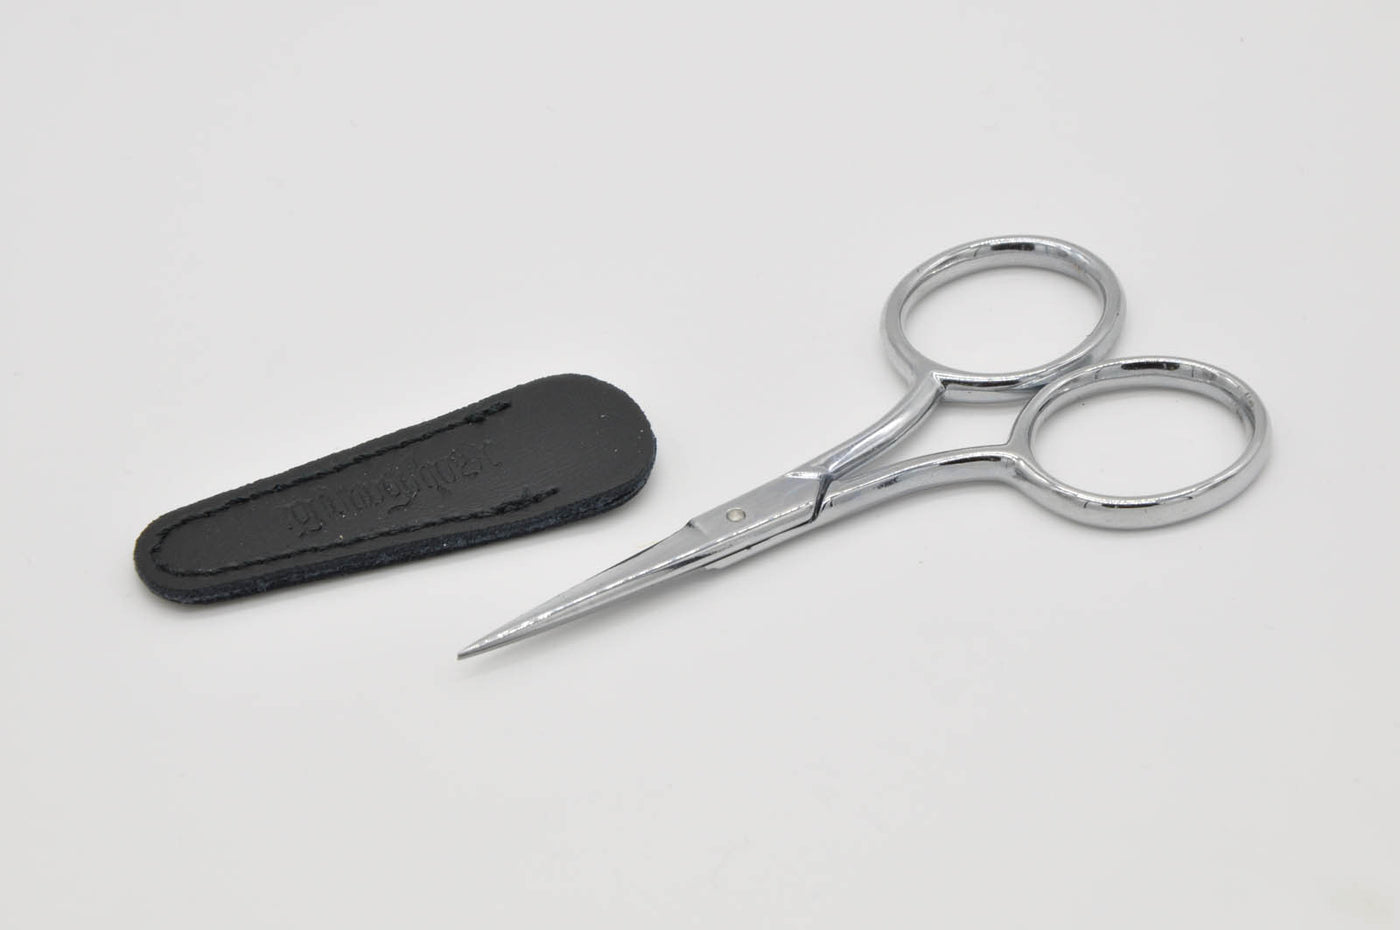 Gingher 4 Embroidery Scissors